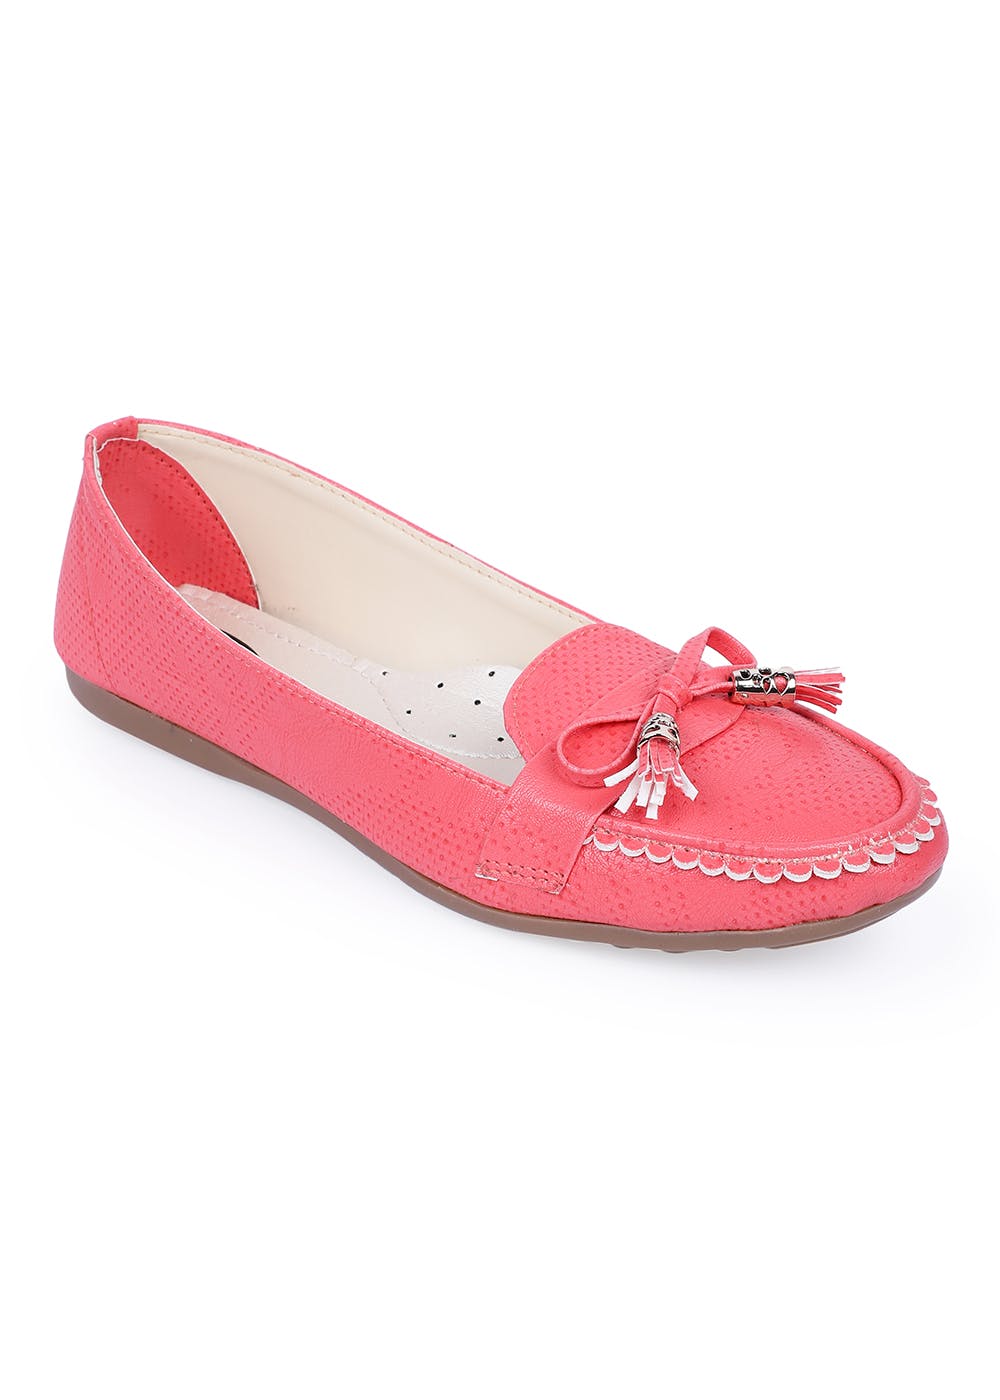 Get Perforated & Bow Detail Solid Ballerinas at ₹ 799 | LBB Shop